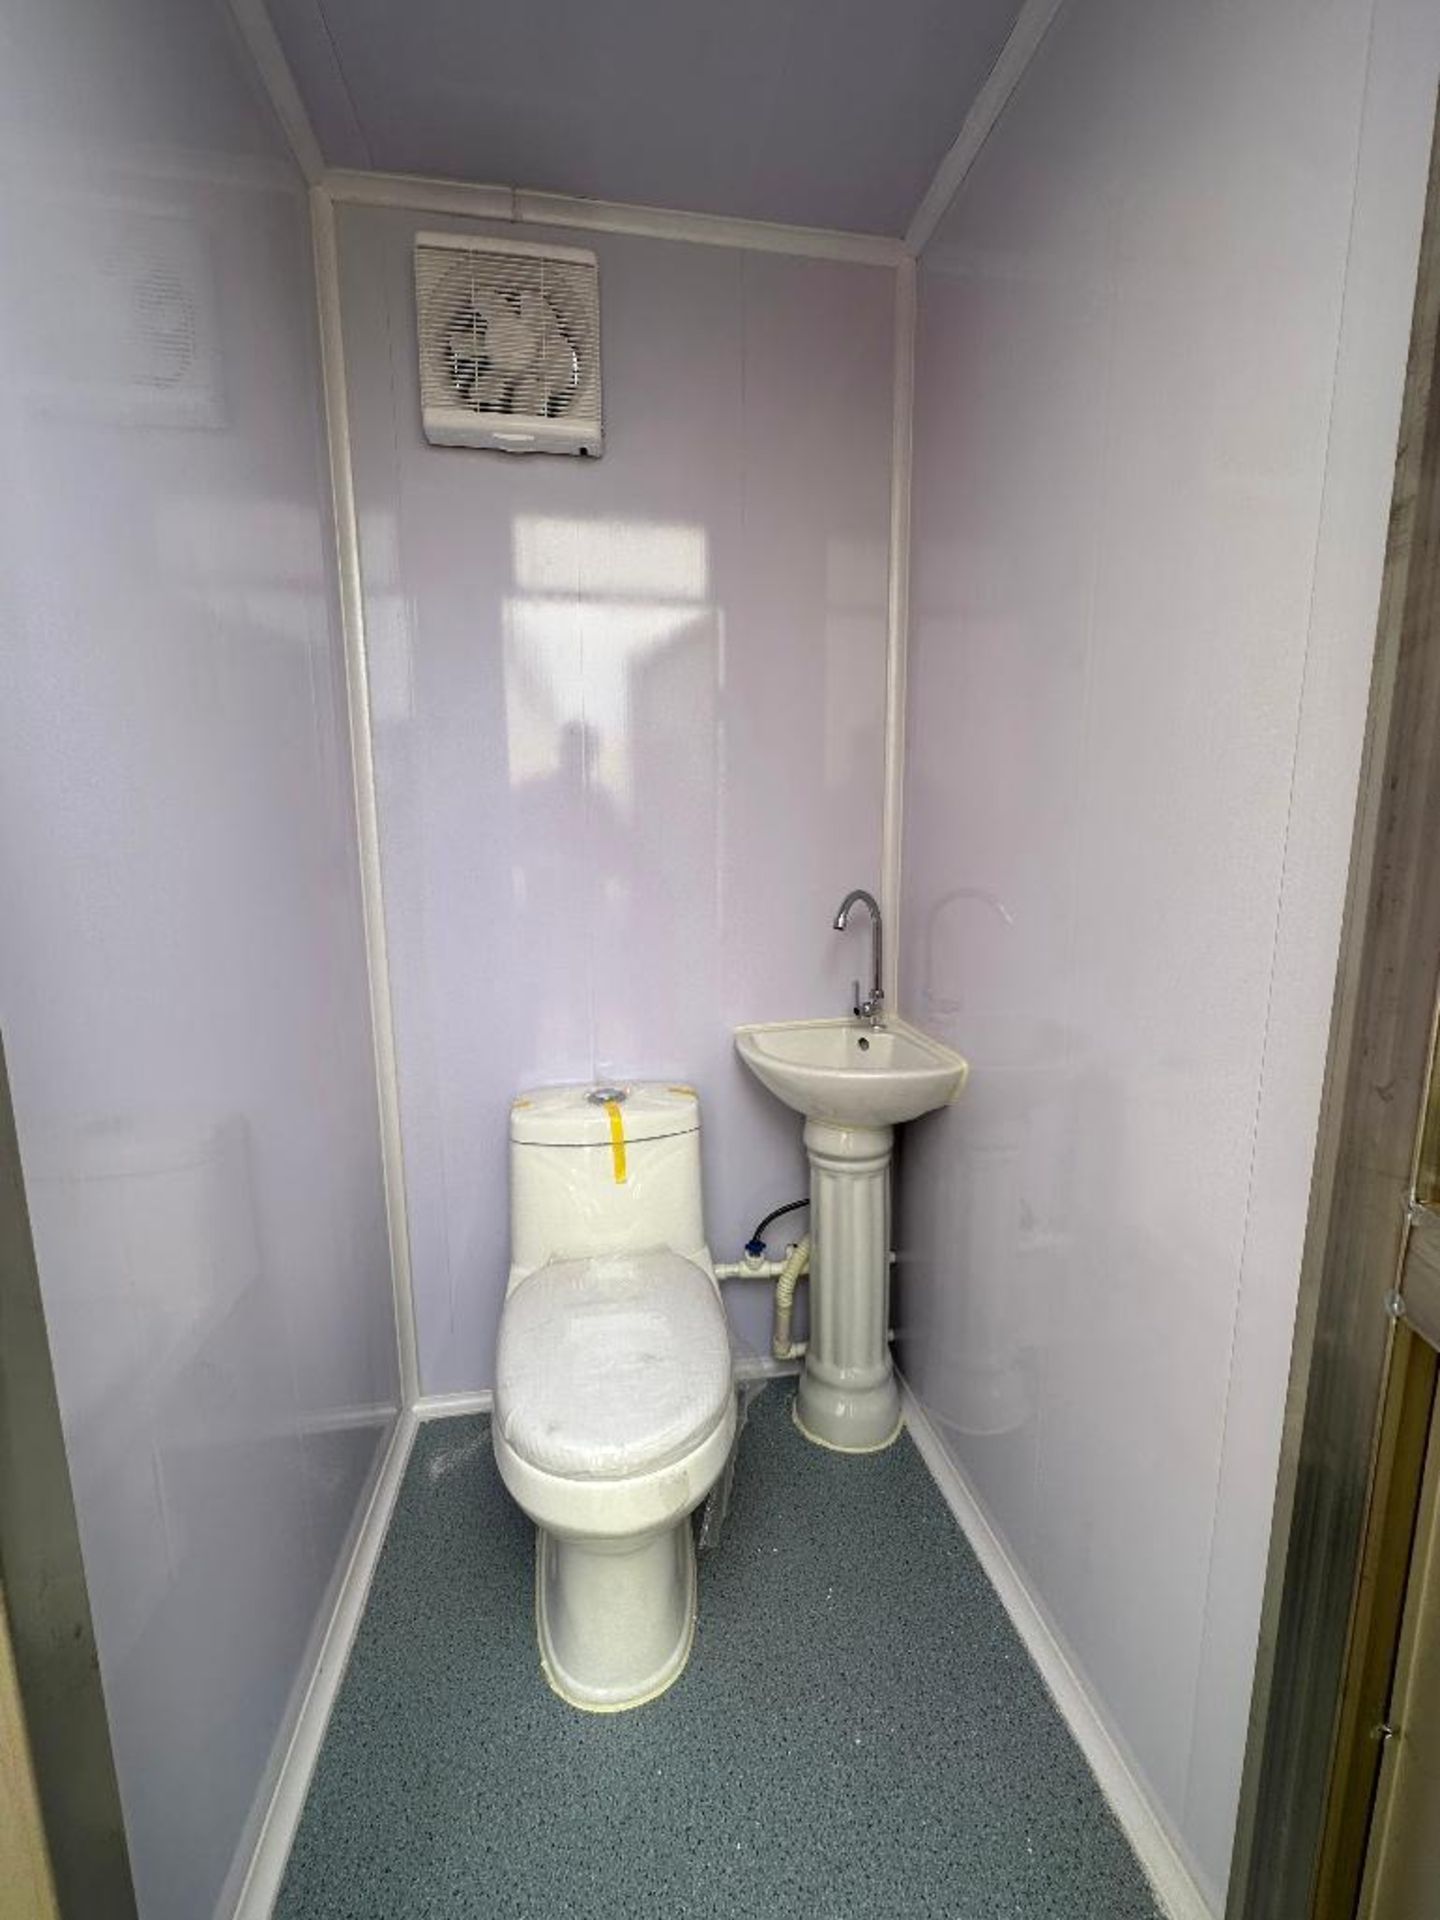 87" X 48" x 93" Double Sided Toilet w/ Fork Pockets, Sinks, Toilets, etc. - Image 9 of 9